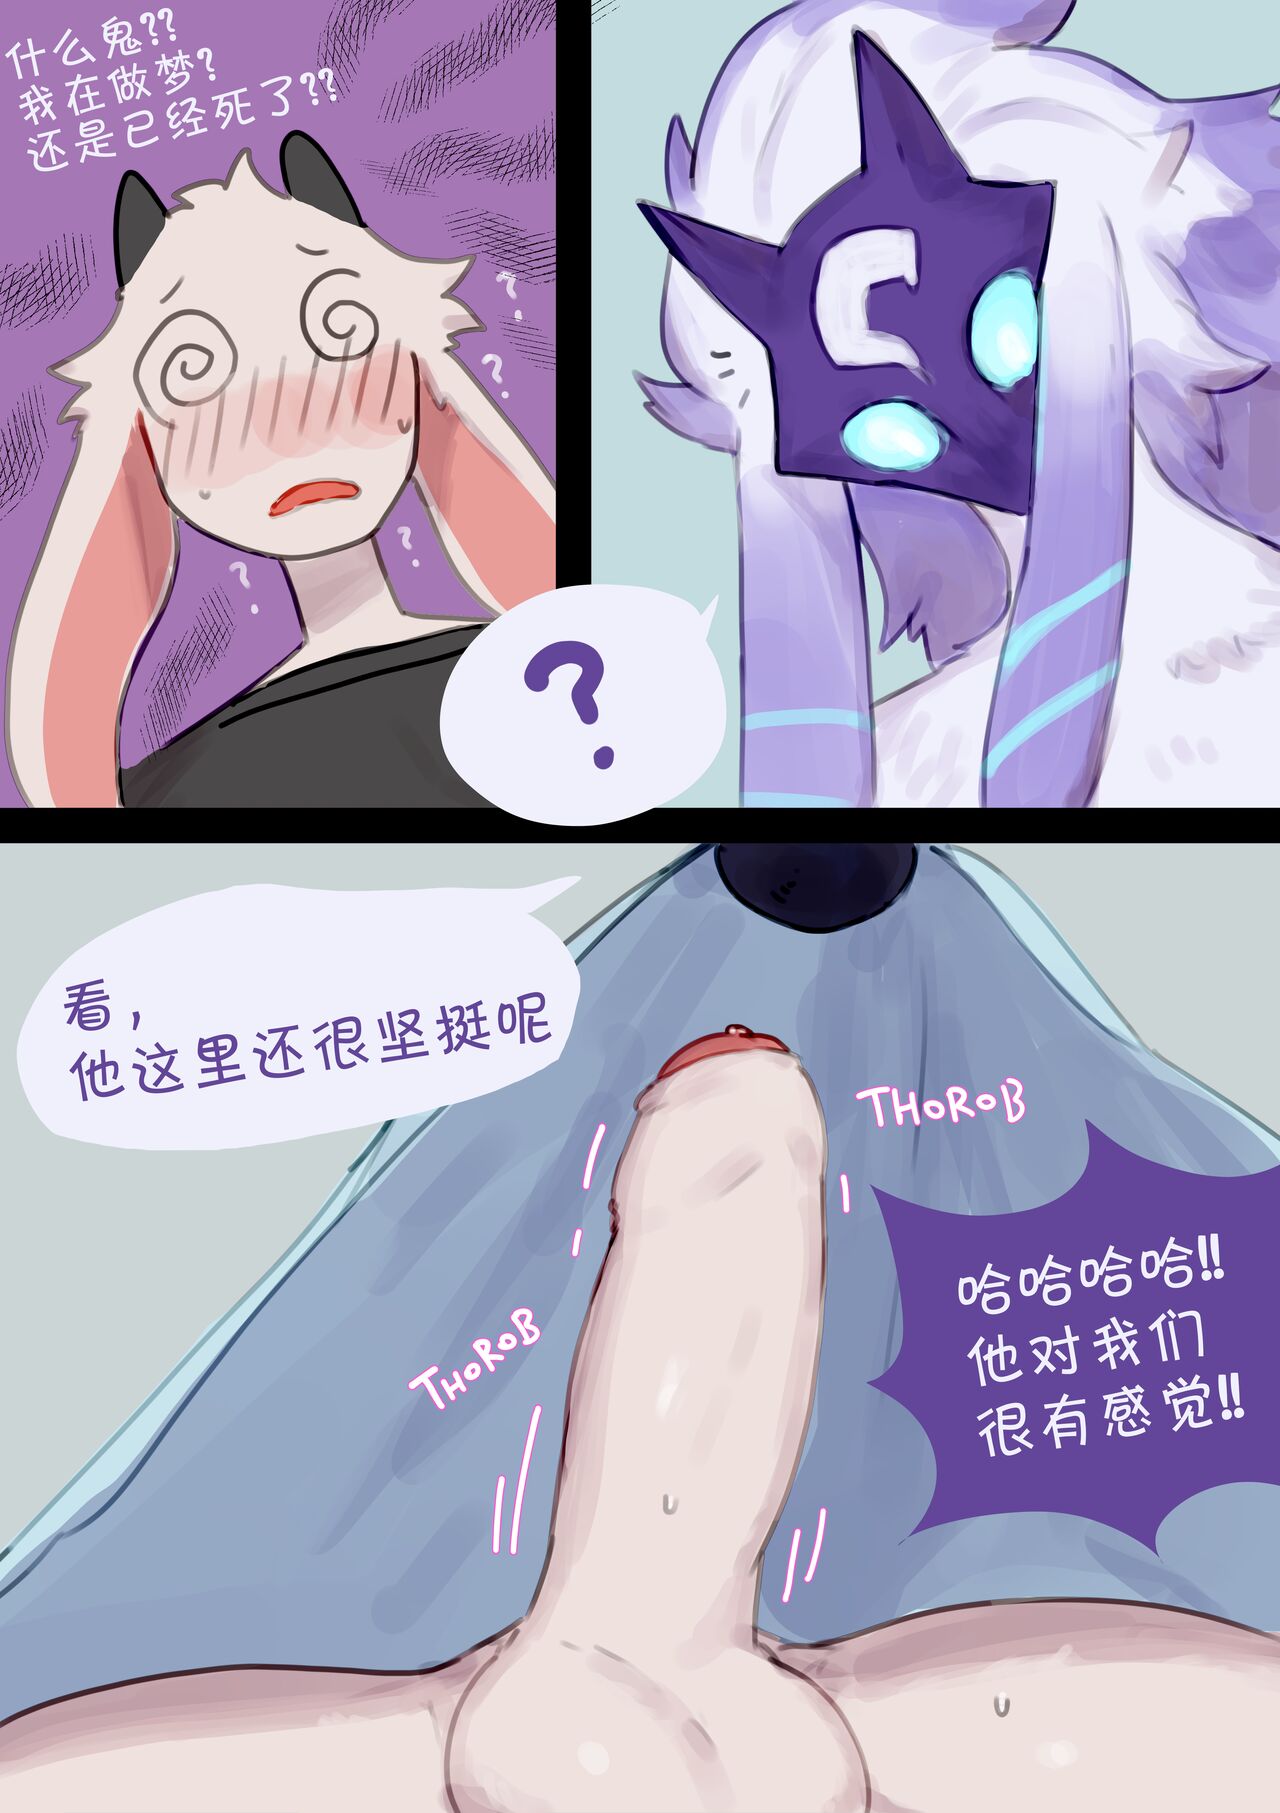 [Buta99] Kindred In My Dream [Chinese] [zc2333] 